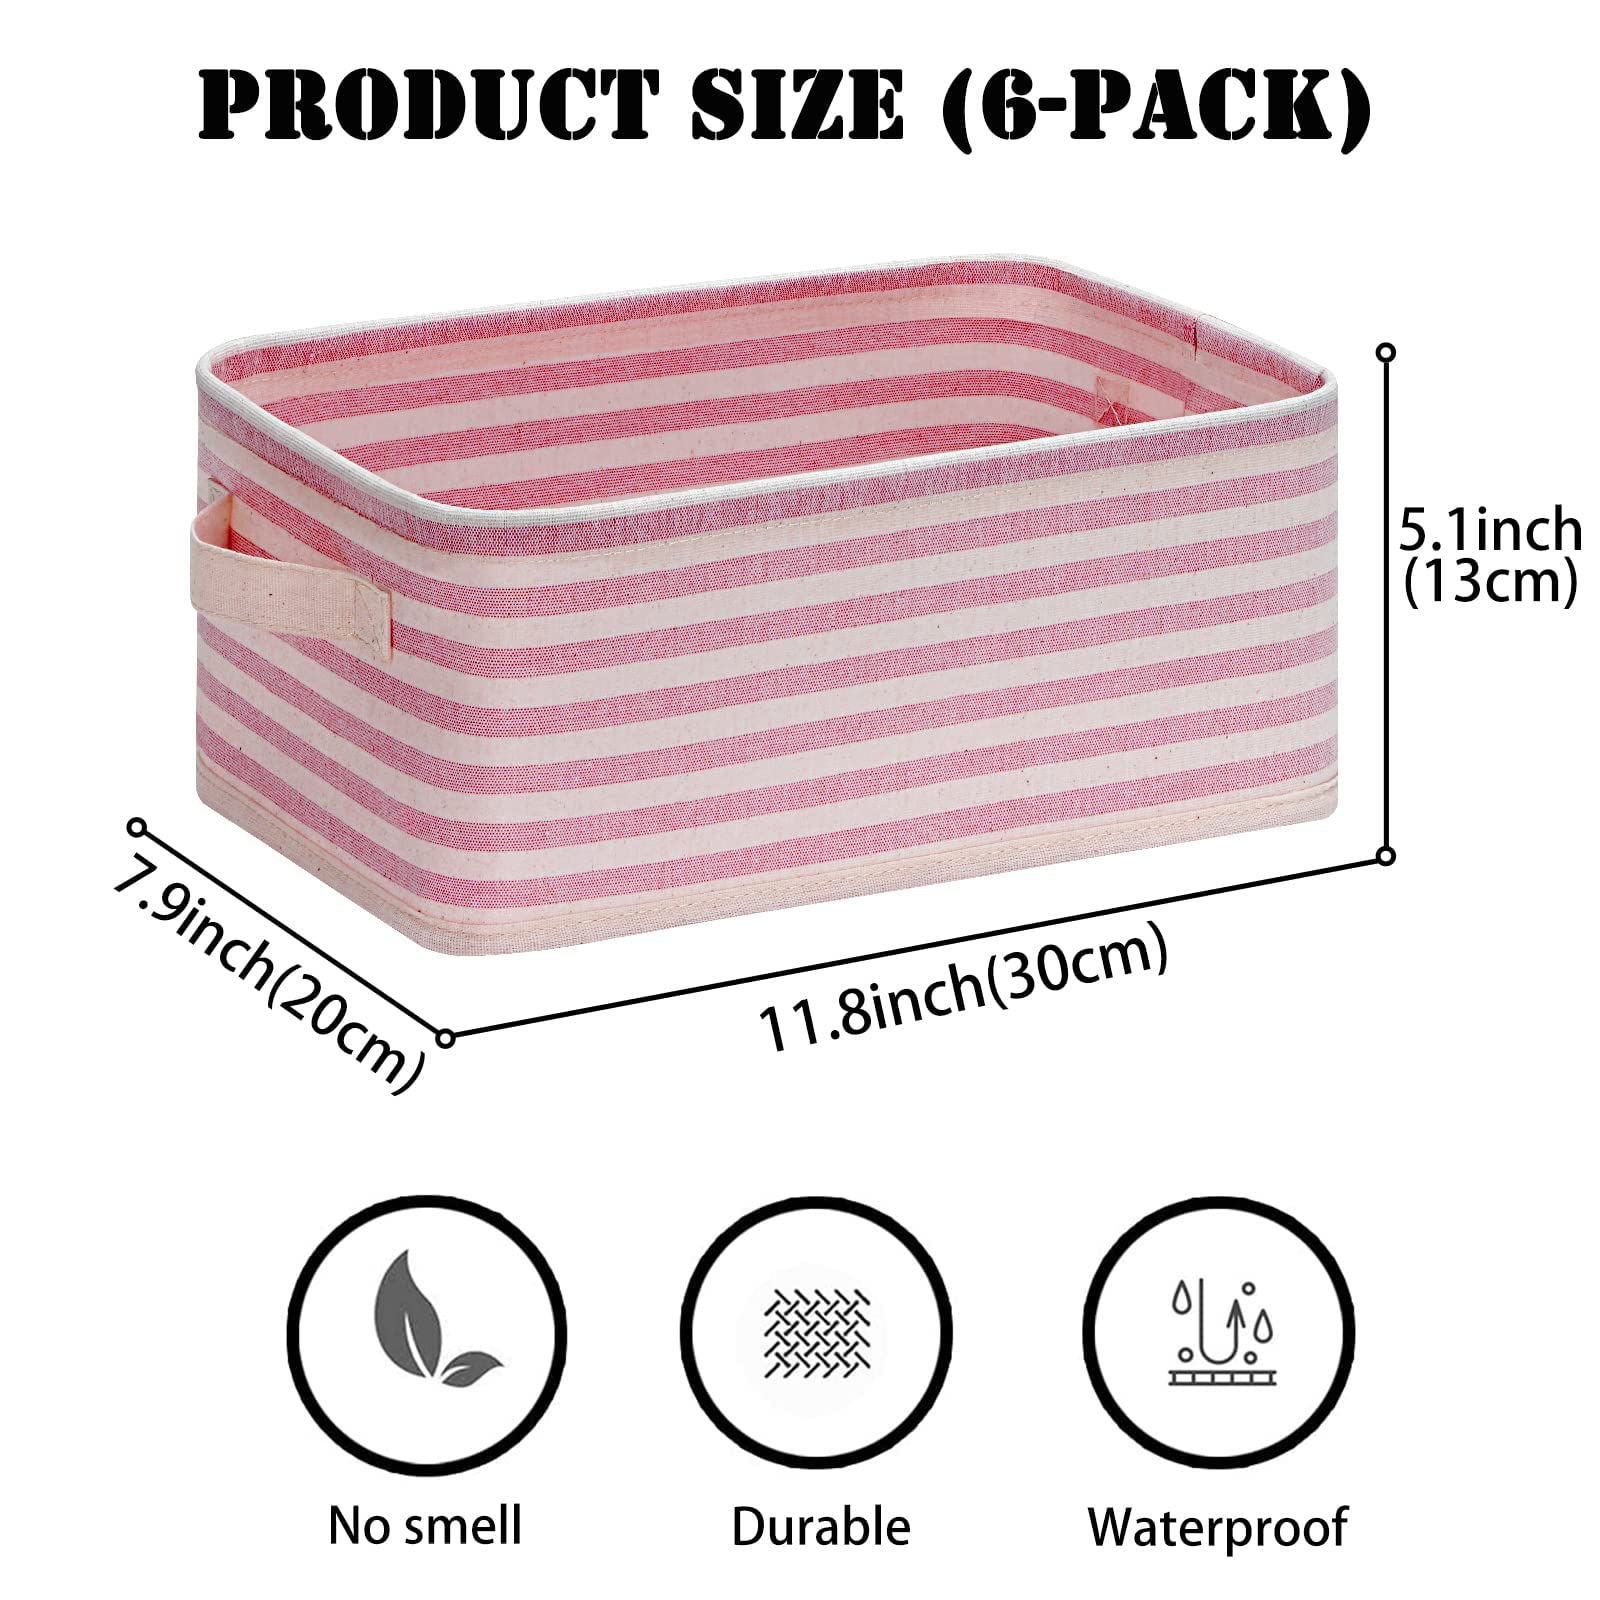 PFFVRP Small Storage Basket 6-Pack, Fabric Storage Bins for Closet, Storage Baskets for Shelves Organizing, Folable Baskets for organizing Clothes, Toys, Books, Gifts (Pink)